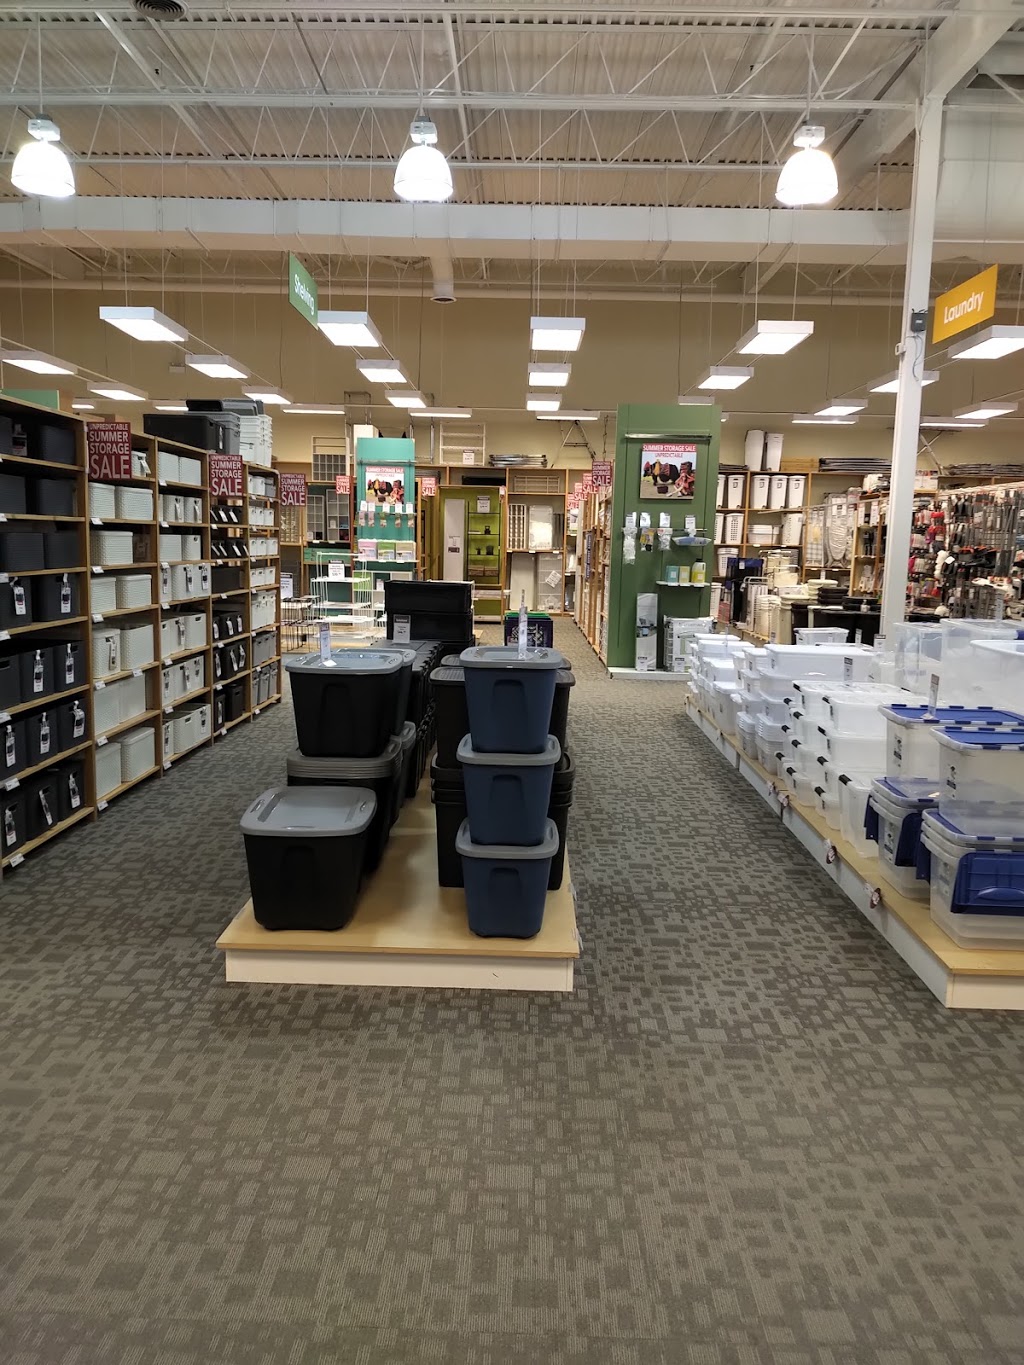 Solutions - Your Organized Living Store | 225-6 The Boardwalk, Kitchener, ON N2N 0B1, Canada | Phone: (519) 571-0471